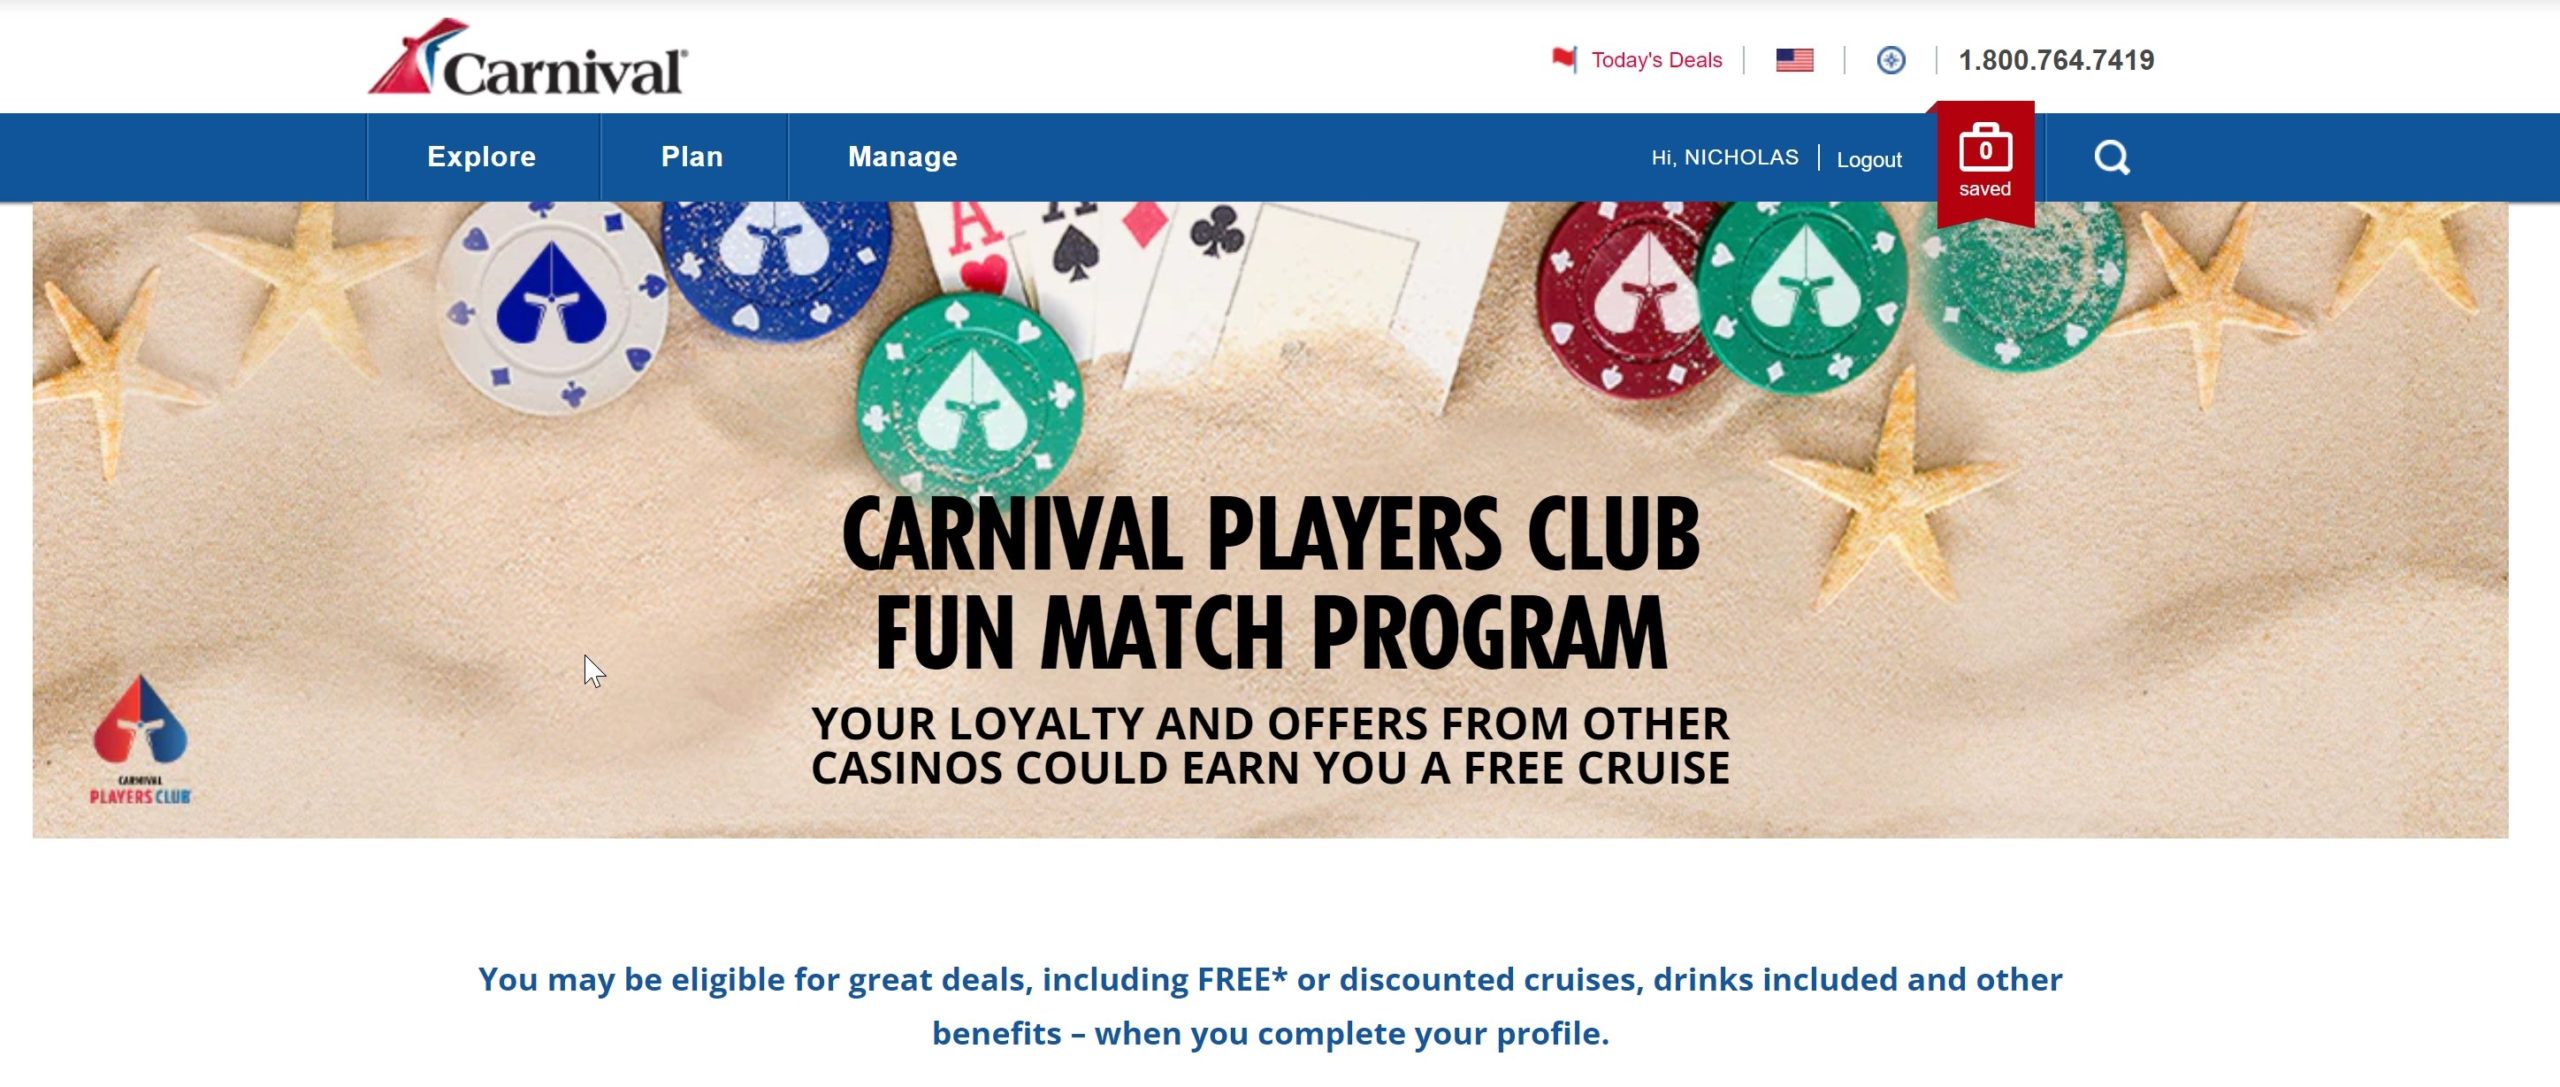 How to cruise for free with Carnival